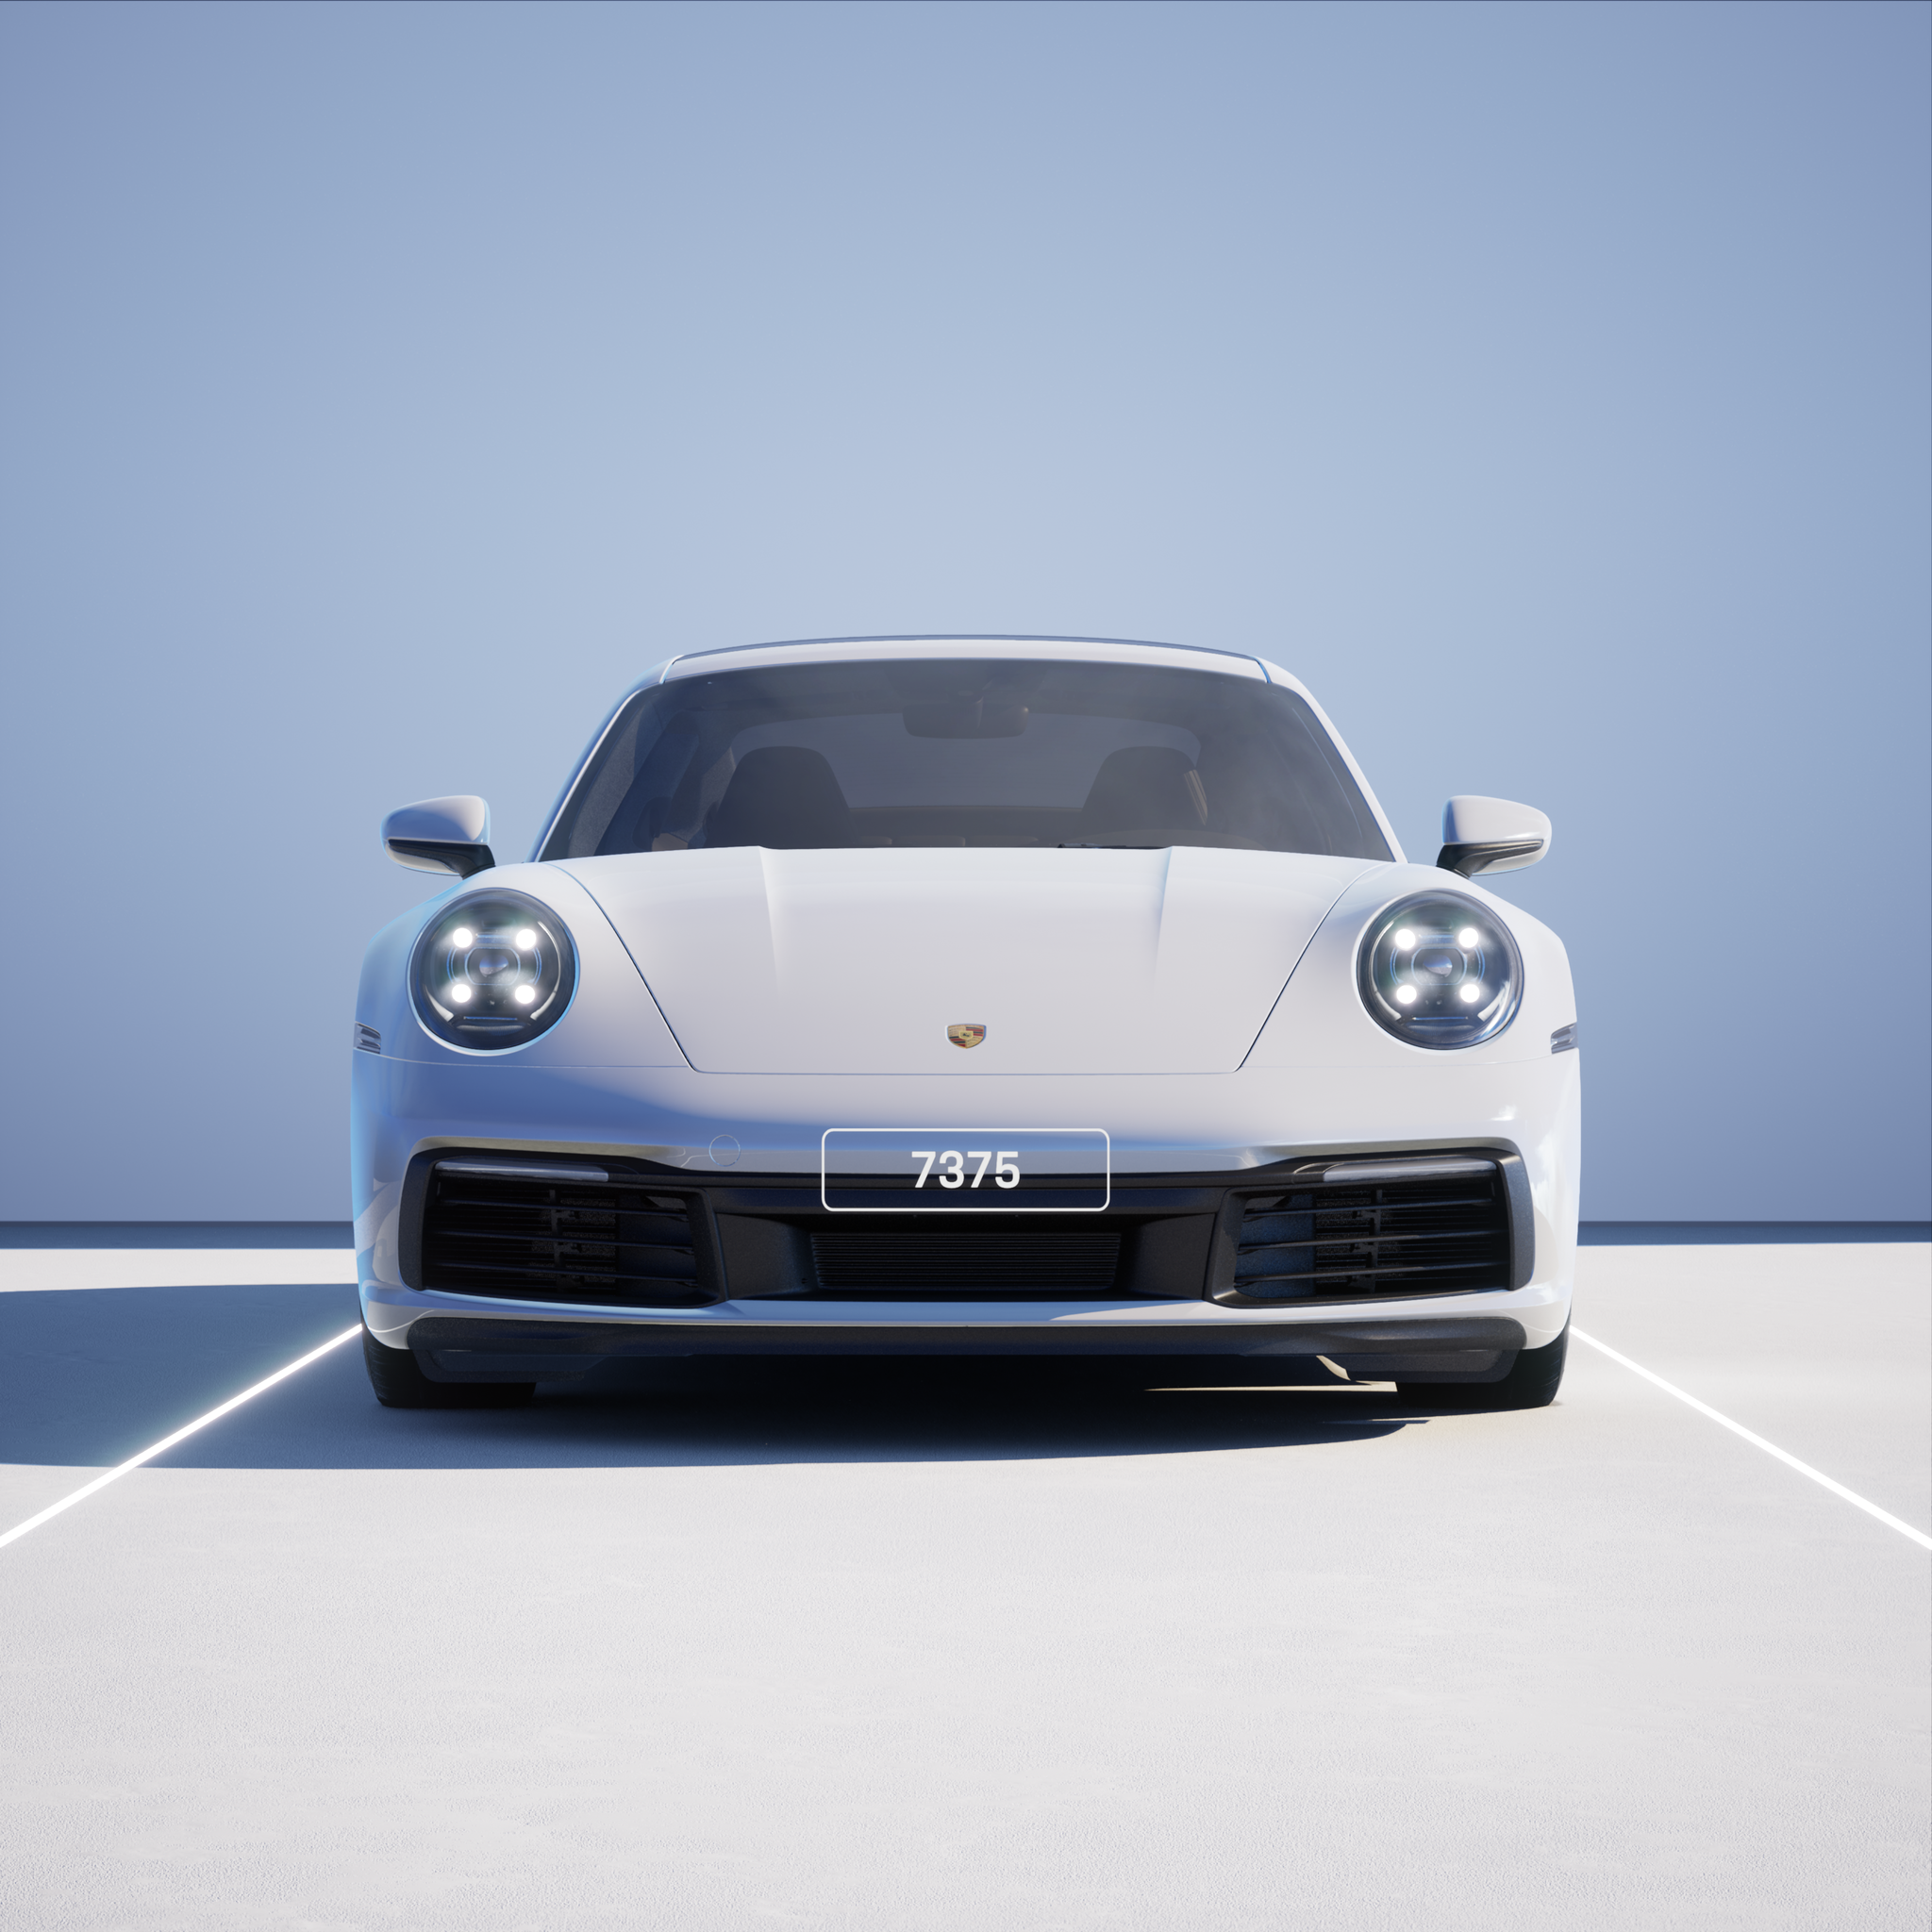 The PORSCHΞ 911 7375 image in phase